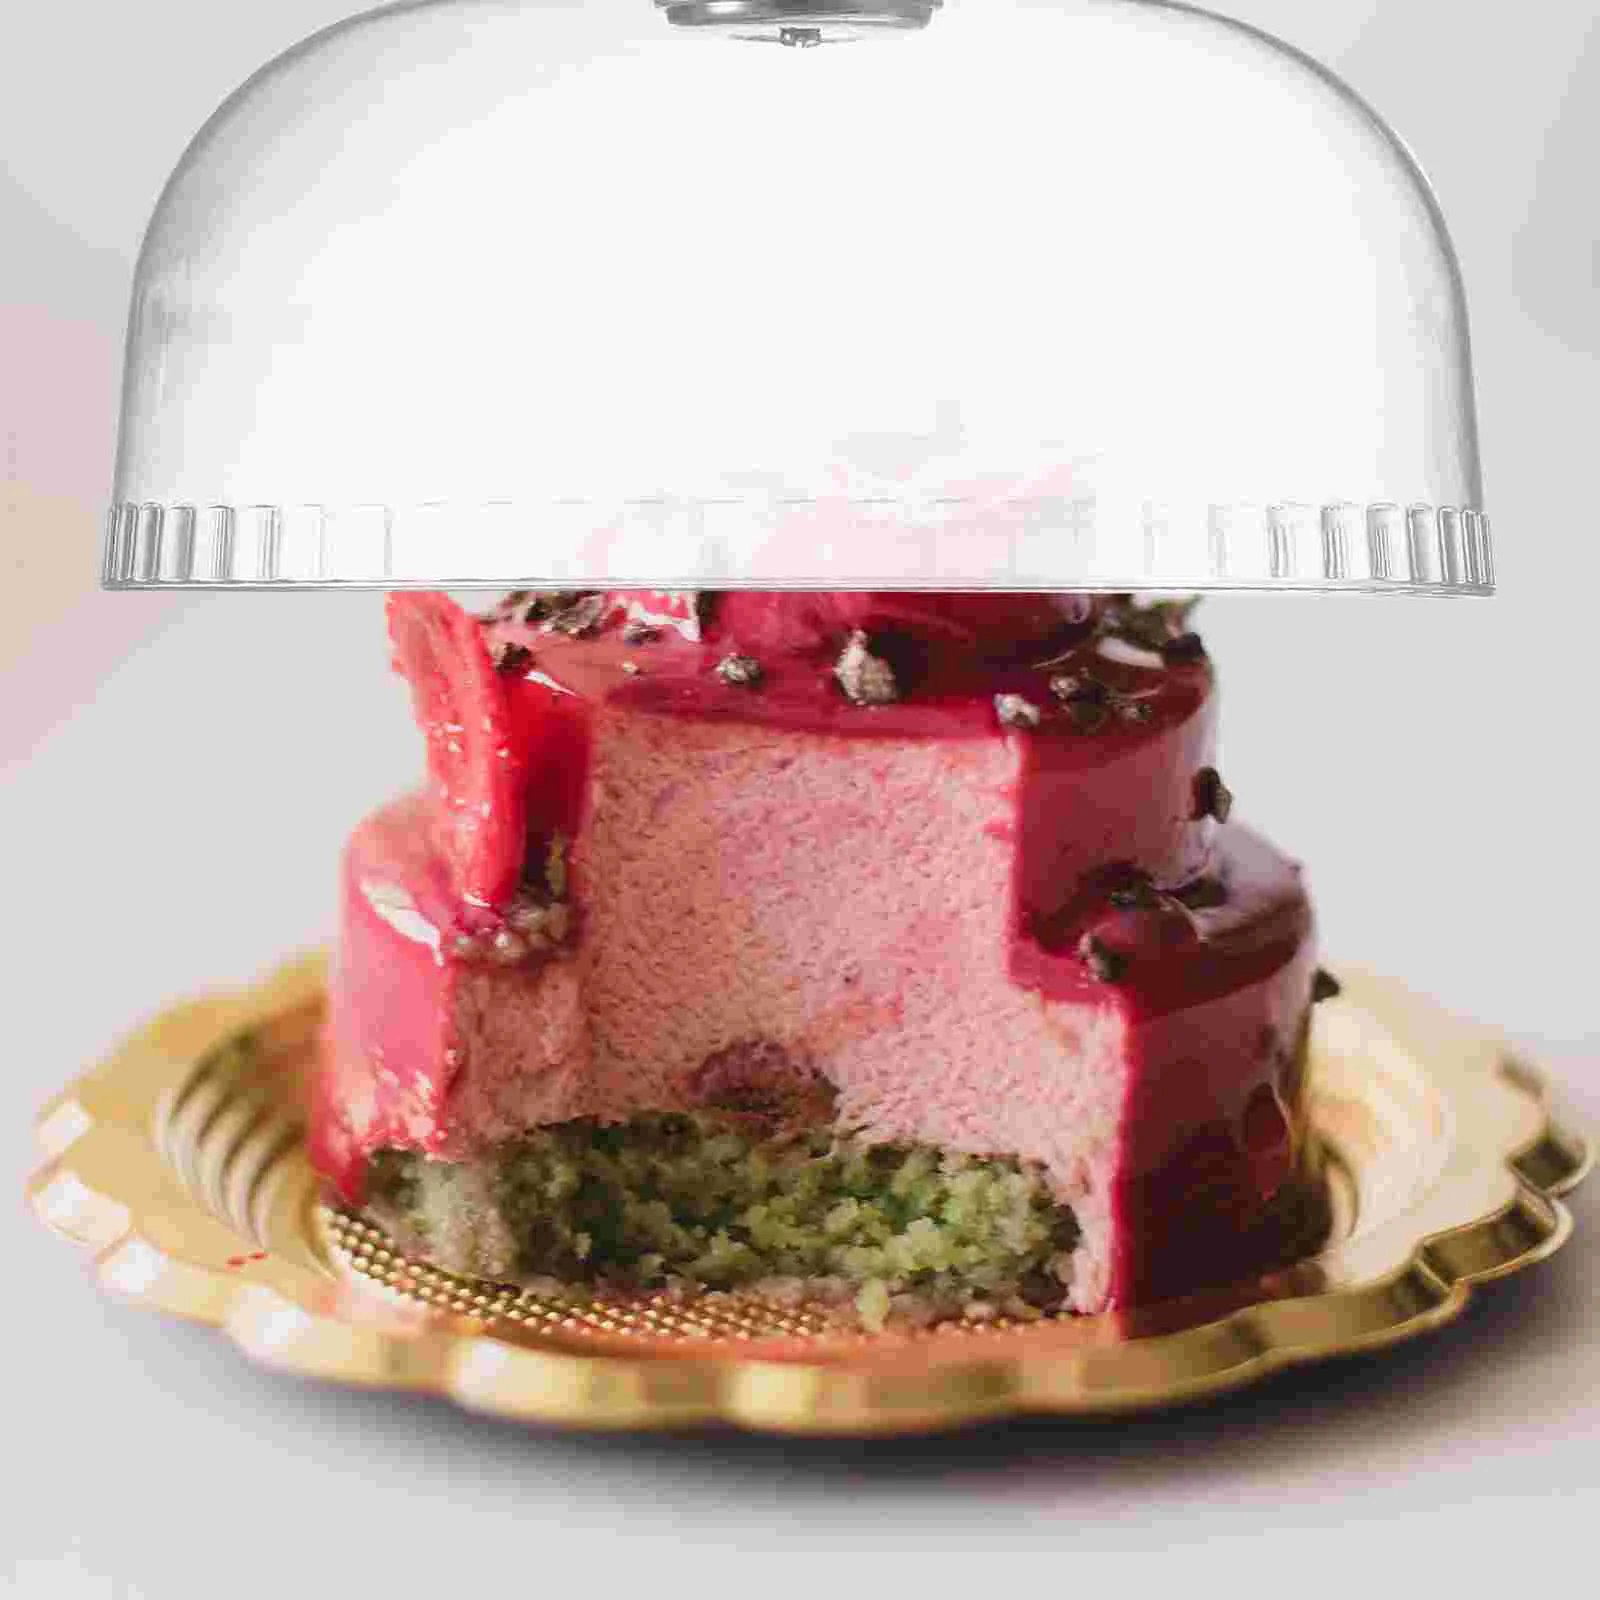 https://ae01.alicdn.com/kf/S4ea77277a00c40608ba31101eaef2ae9R/Cover-Dome-Cake-Food-Microwave-Display-Stand-Splatter-Plate-Plastic-Cloche-Dessert-Clear-Acrylic-Lid-Domes.jpg